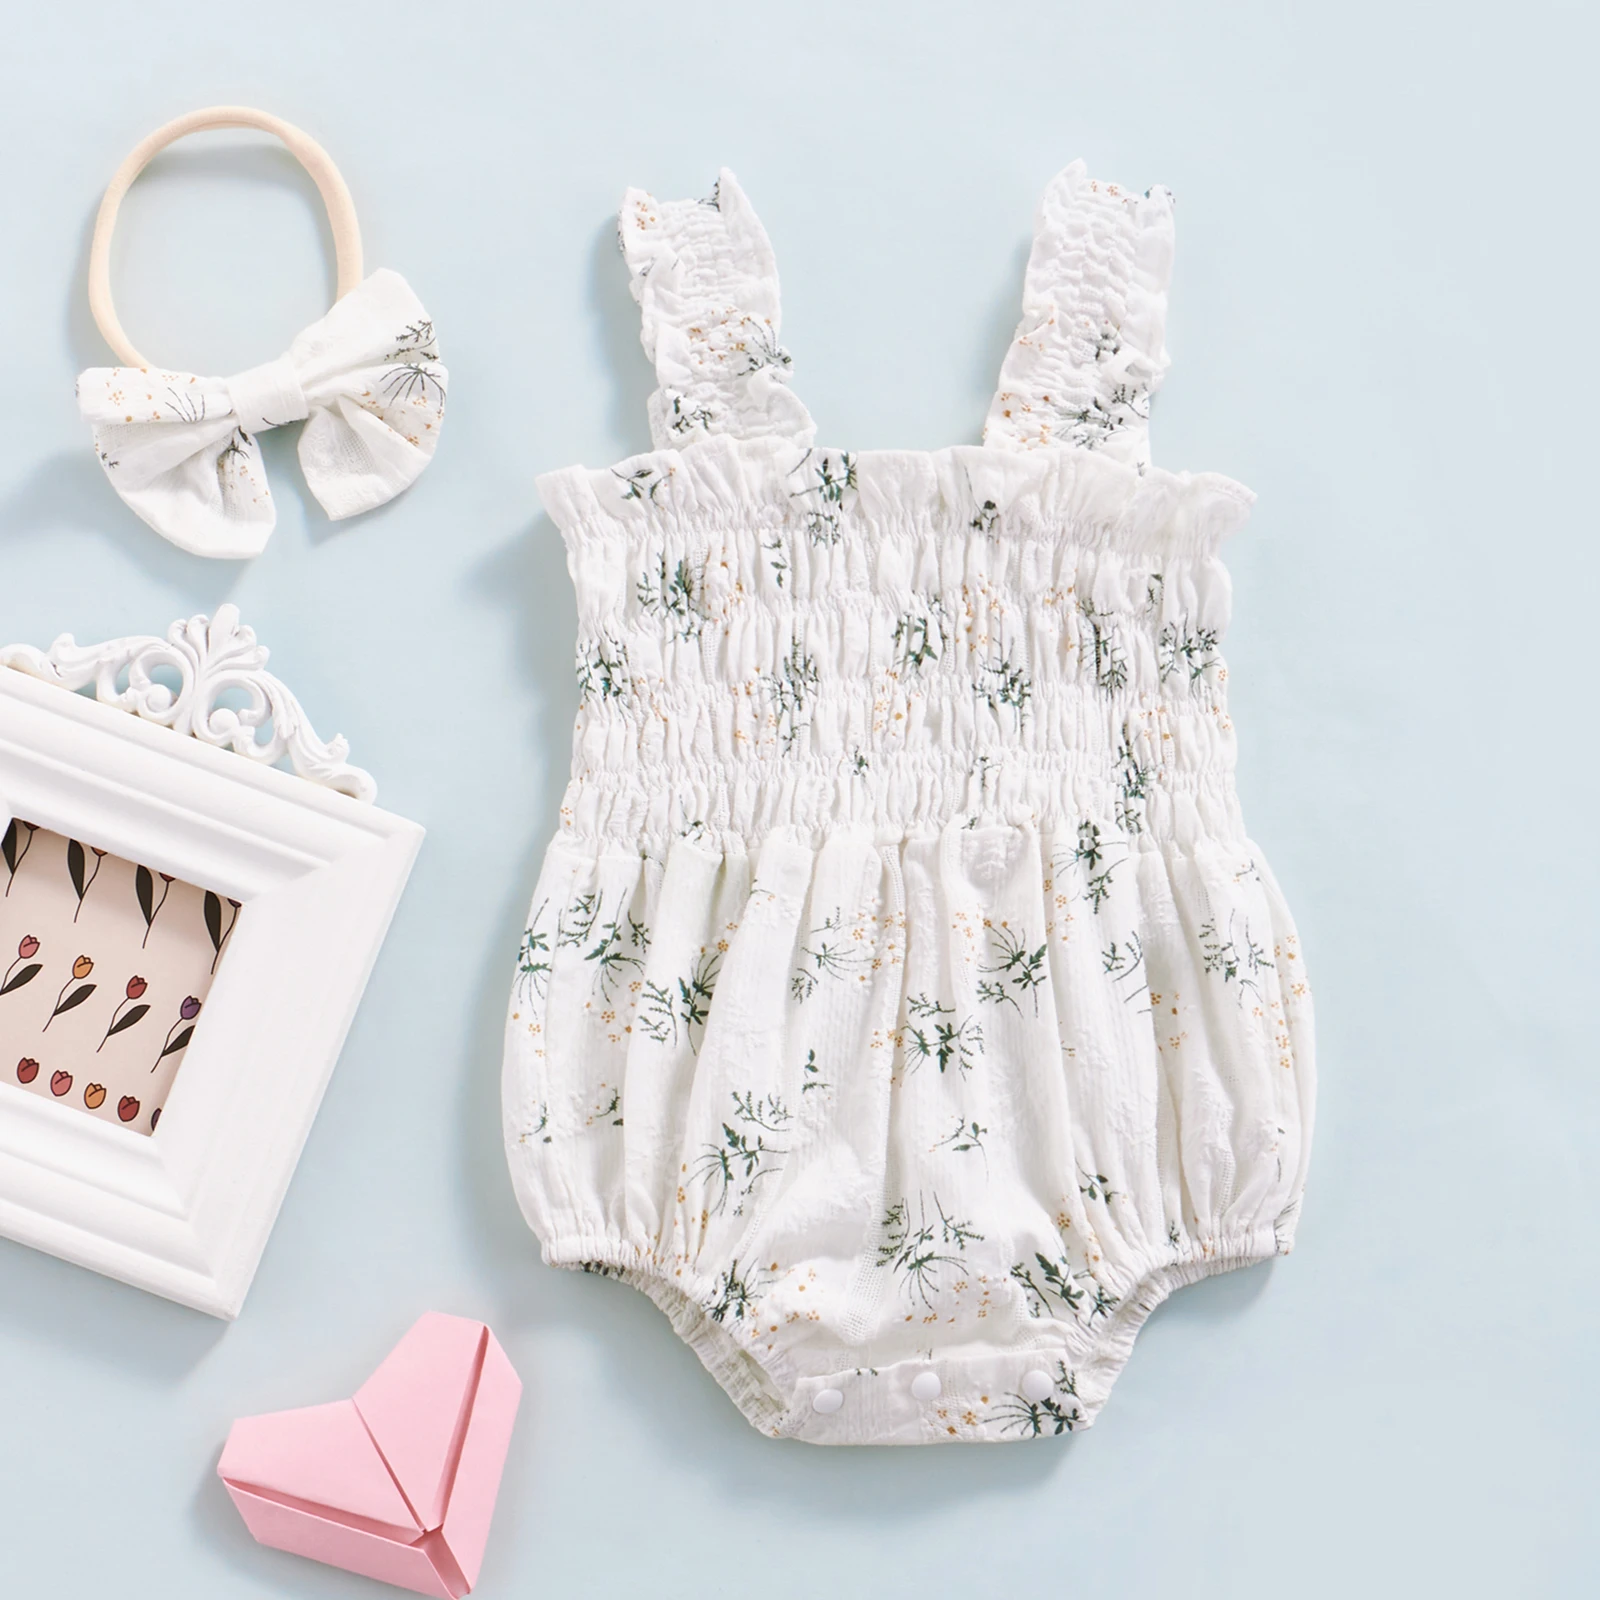 vintage Baby Bodysuits Newborn Baby Girl Ruffles Rompers Floral Sleeveless Jumpsuit Shoulder Straps Playuits + Bow Headband 2Pcs Pleated Casual Clothes Baby Bodysuits made from viscose 